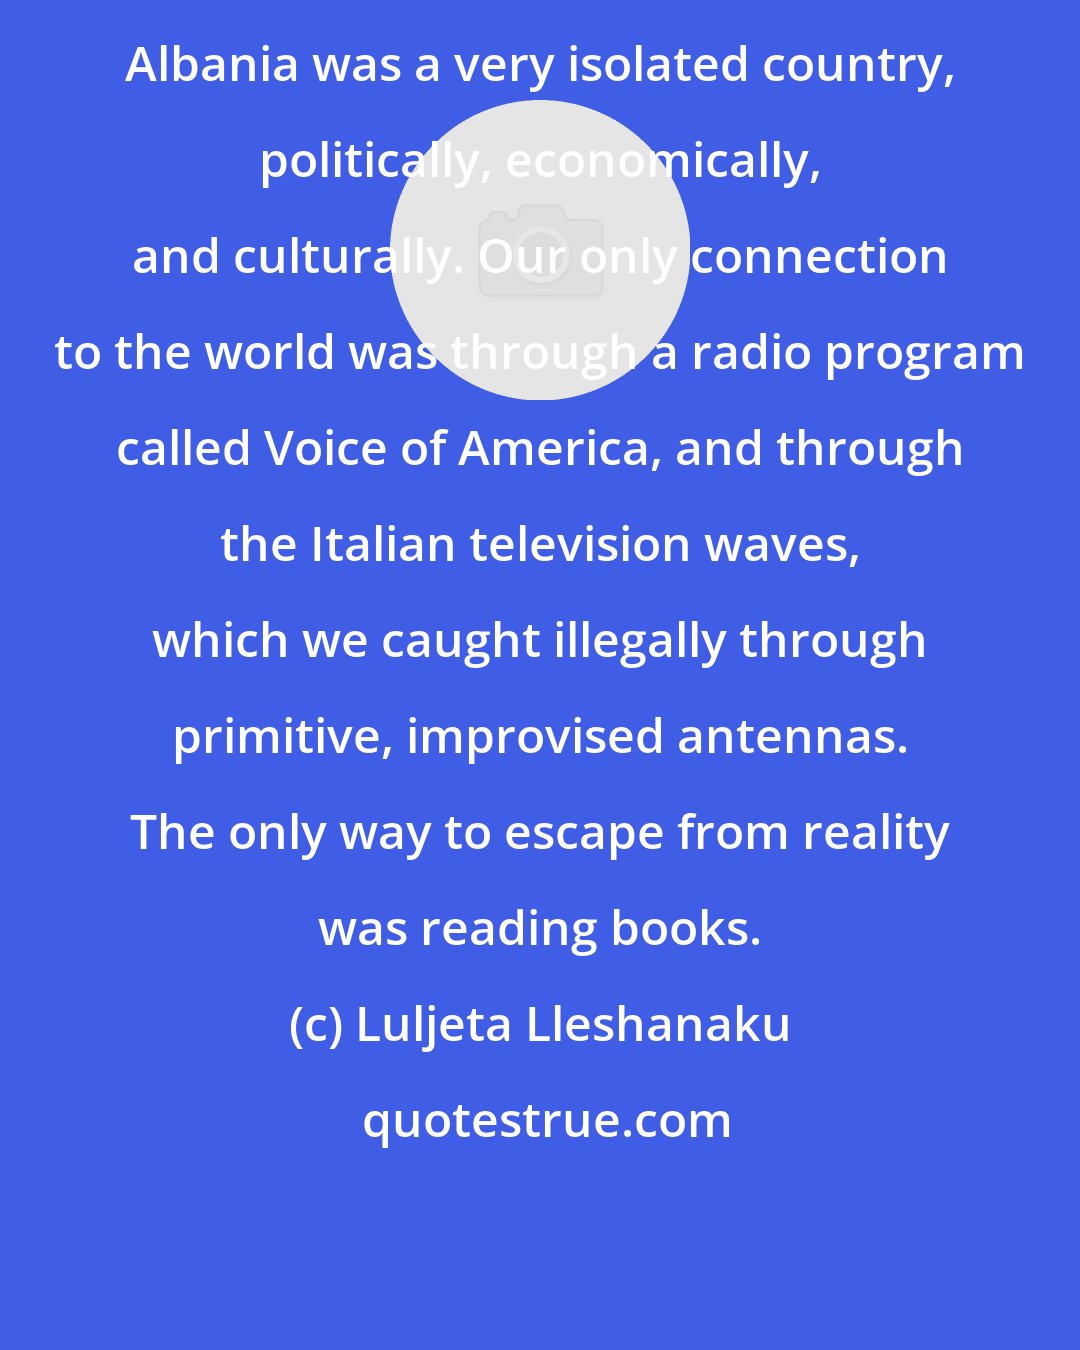 Luljeta Lleshanaku: Albania was a very isolated country, politically, economically, and culturally. Our only connection to the world was through a radio program called Voice of America, and through the Italian television waves, which we caught illegally through primitive, improvised antennas. The only way to escape from reality was reading books.